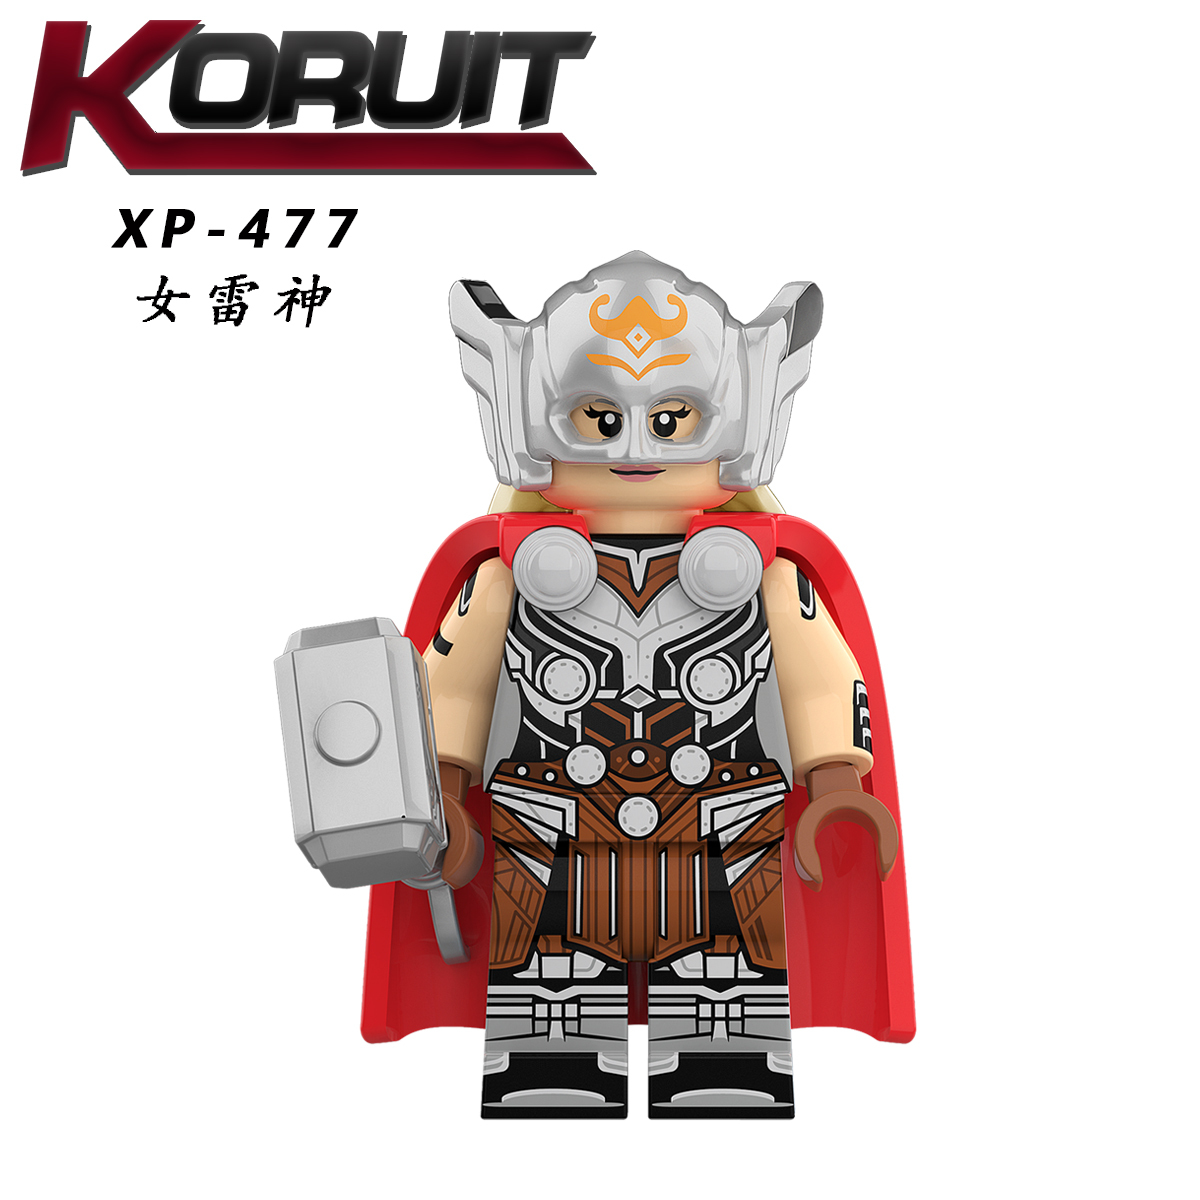 KT1062 XP475 XP476 XP477 XP478 XP479 XP480 XP481 XP482 Super Hero Movie Series Building Blocks Thor Korg Mighty Thor Gorr Star-Lord Valkyrie Ravager Thor Action Figures Educational Toys For Kids Gifts